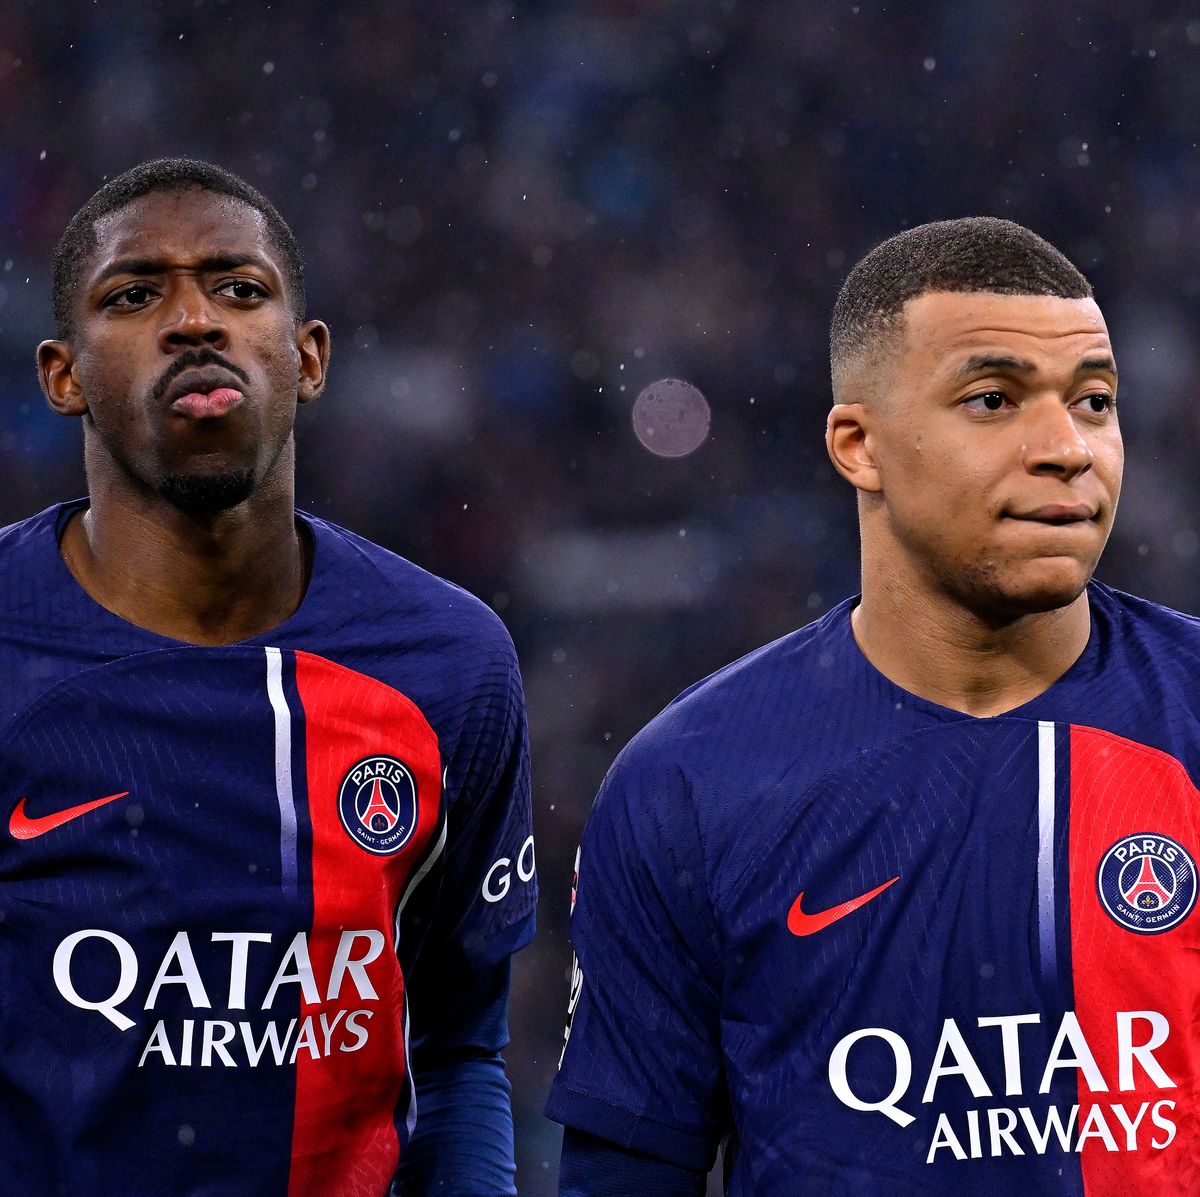 paris saint germain players ousmane dembele and kylian mbappe stand on a football pitch in the rain